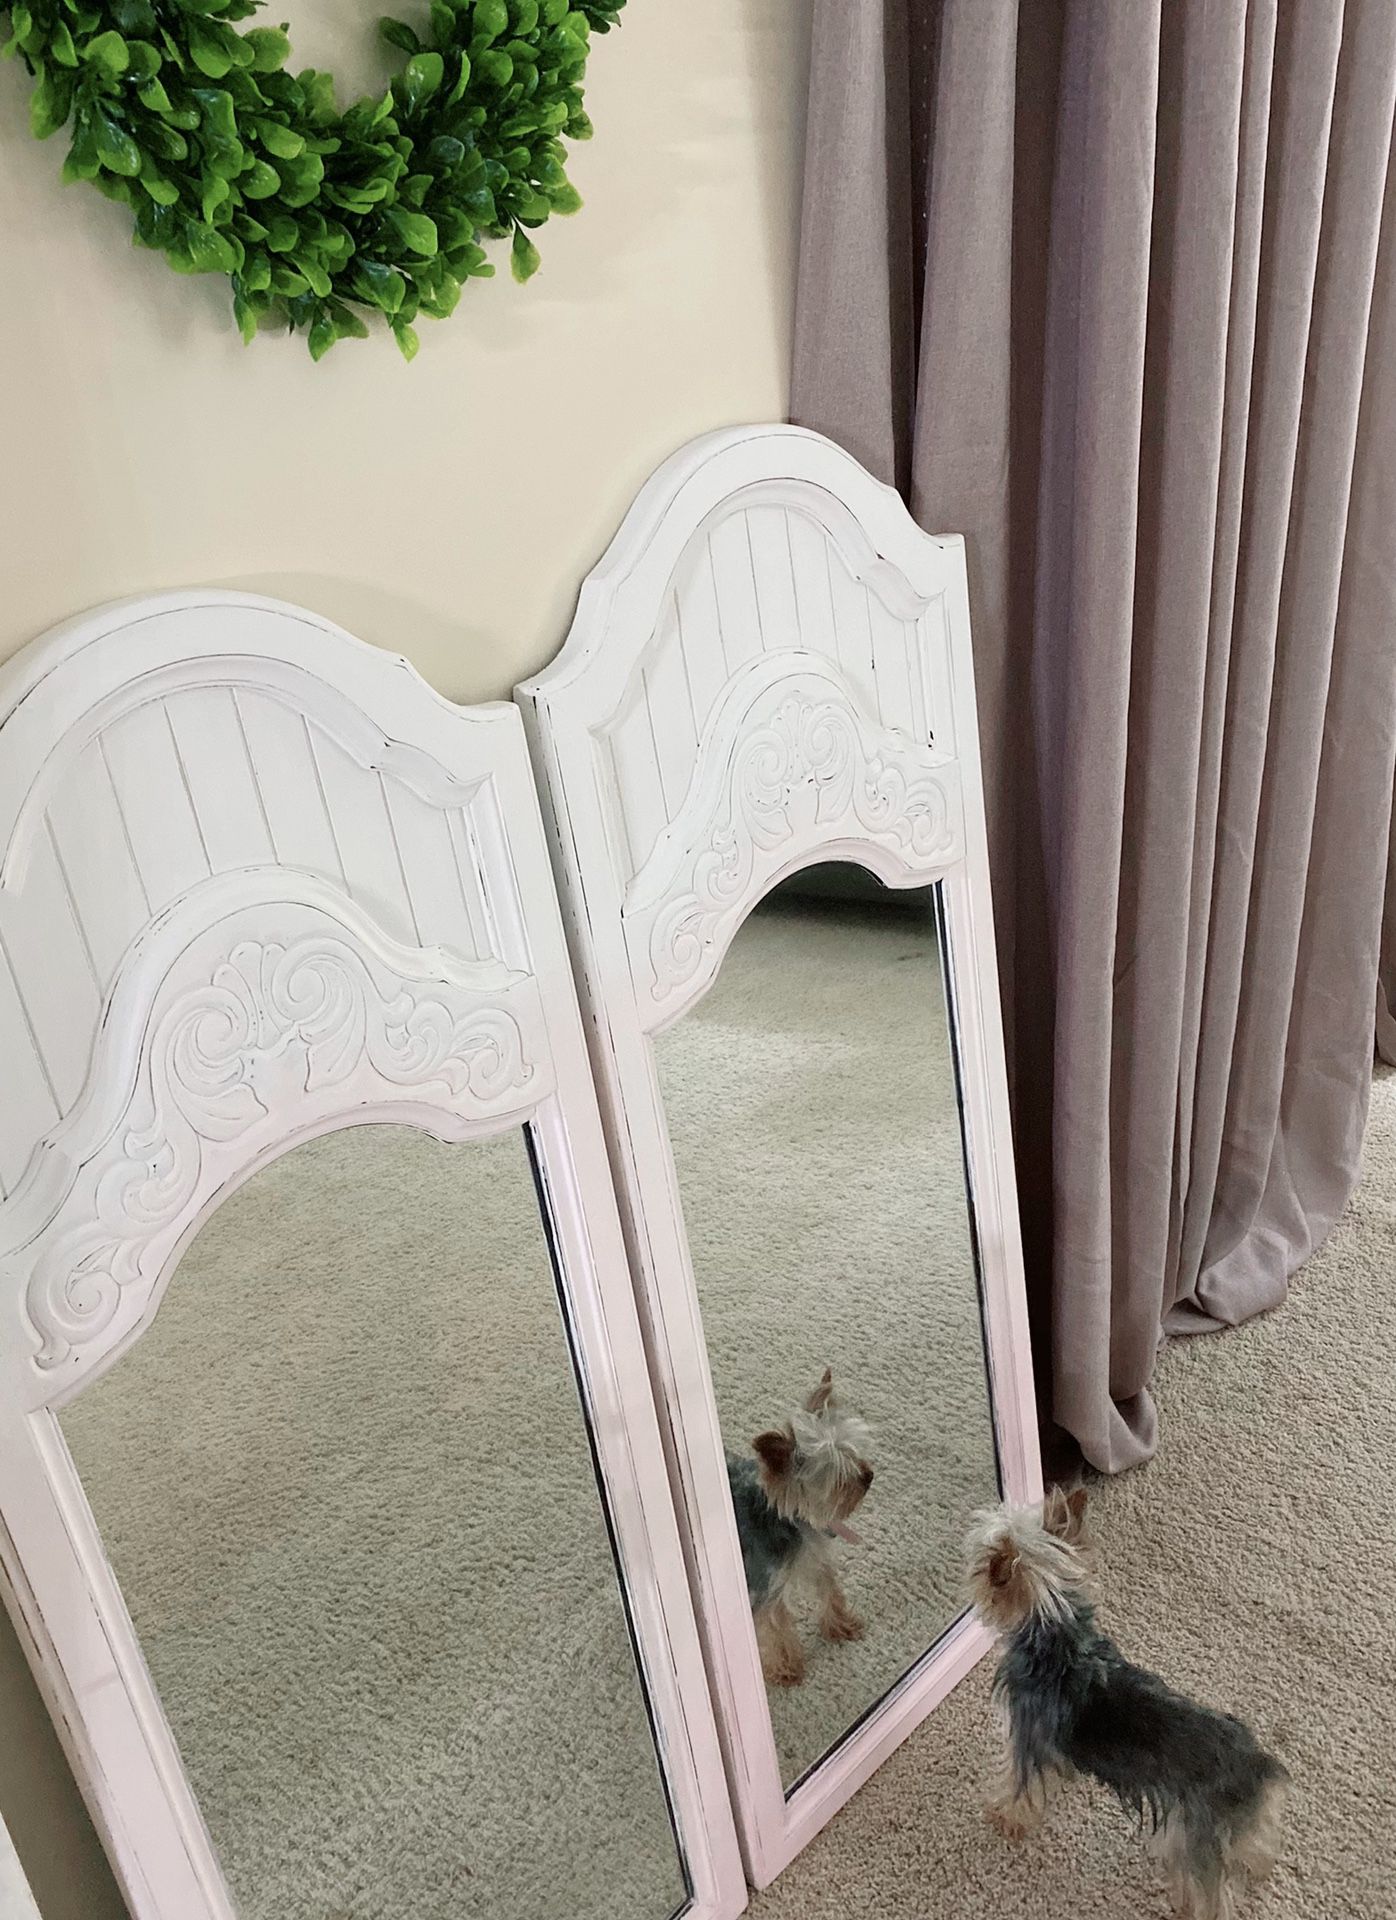 //Farmhouse White, Champagne Pink and Pale Pink Mirror Set//